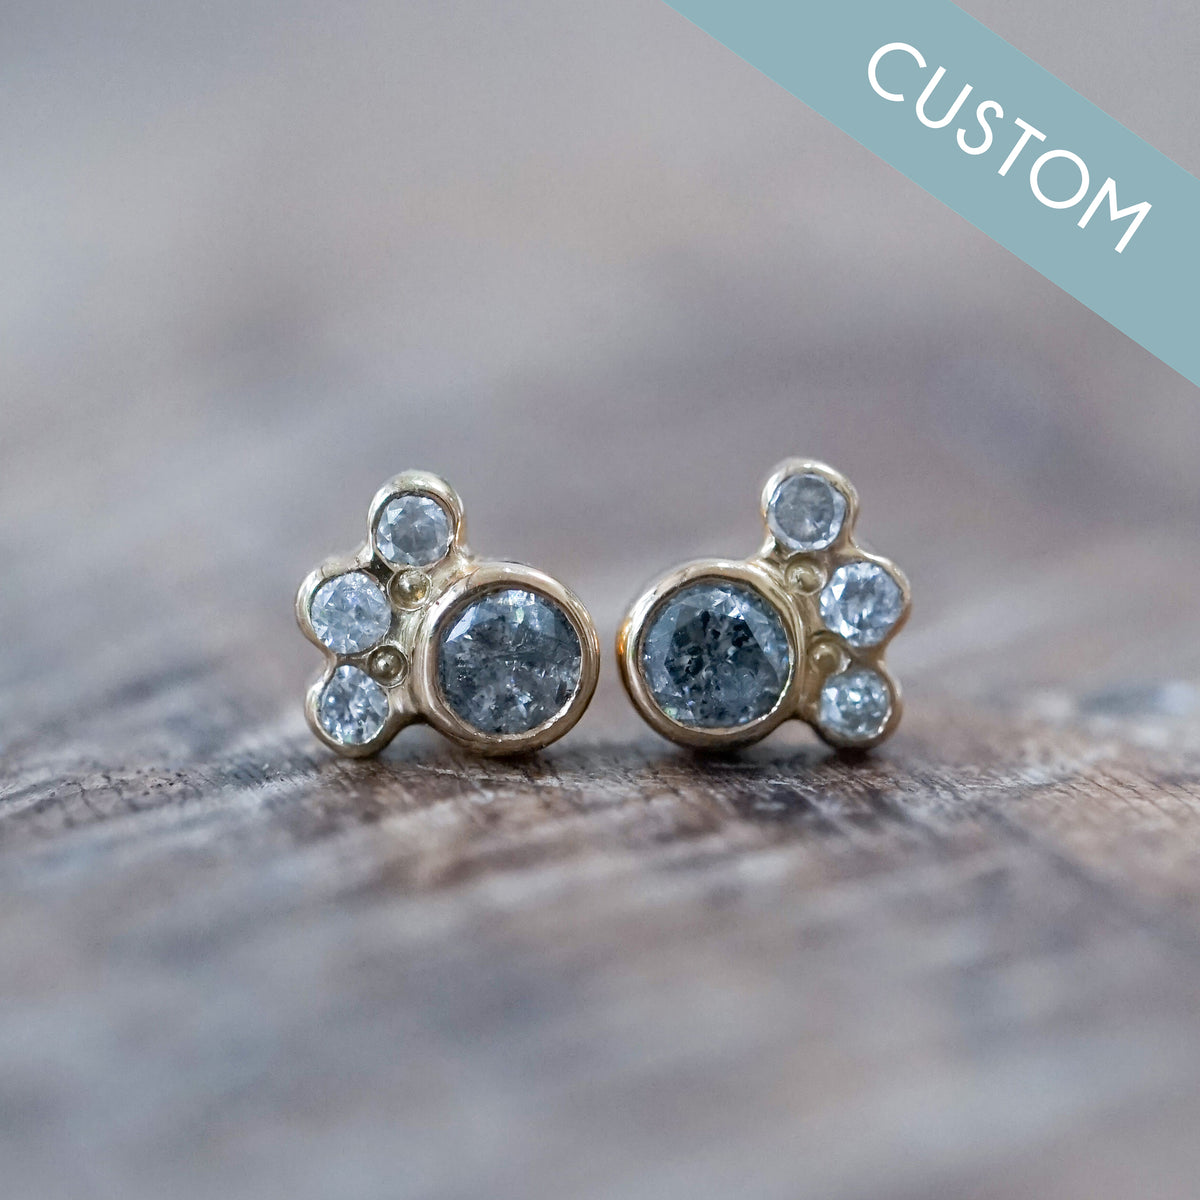 Innovative Custom Jewelry - 14K ROSE GOLD CLUSTER EARRINGS WITH PS, OV, BG,  AND RD DIAMONDS